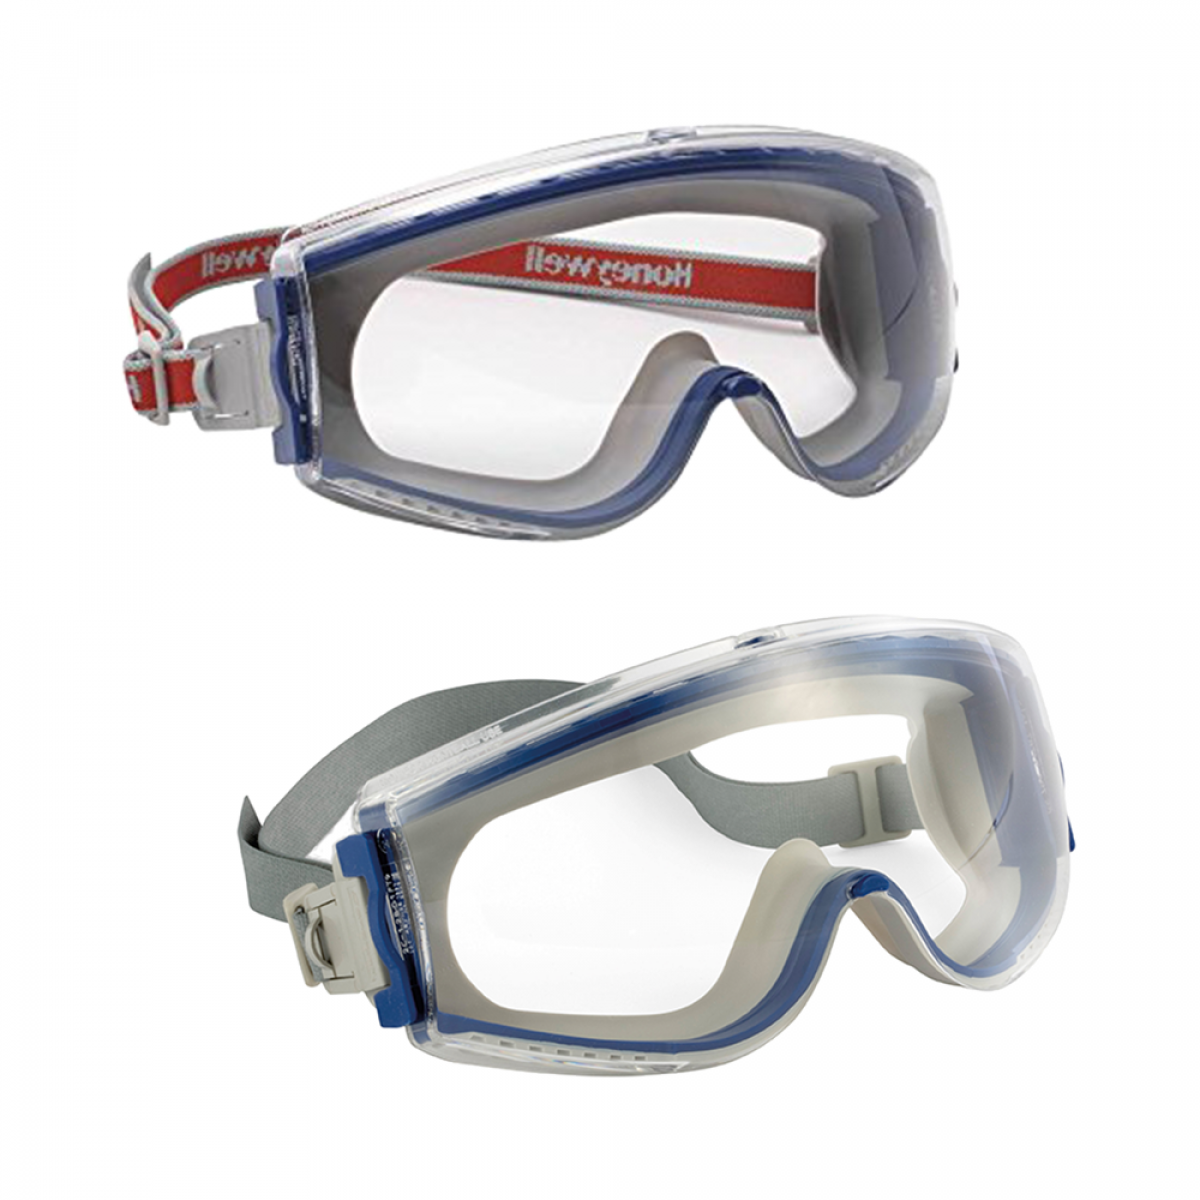 Maxx Pro Goggles with different strap options